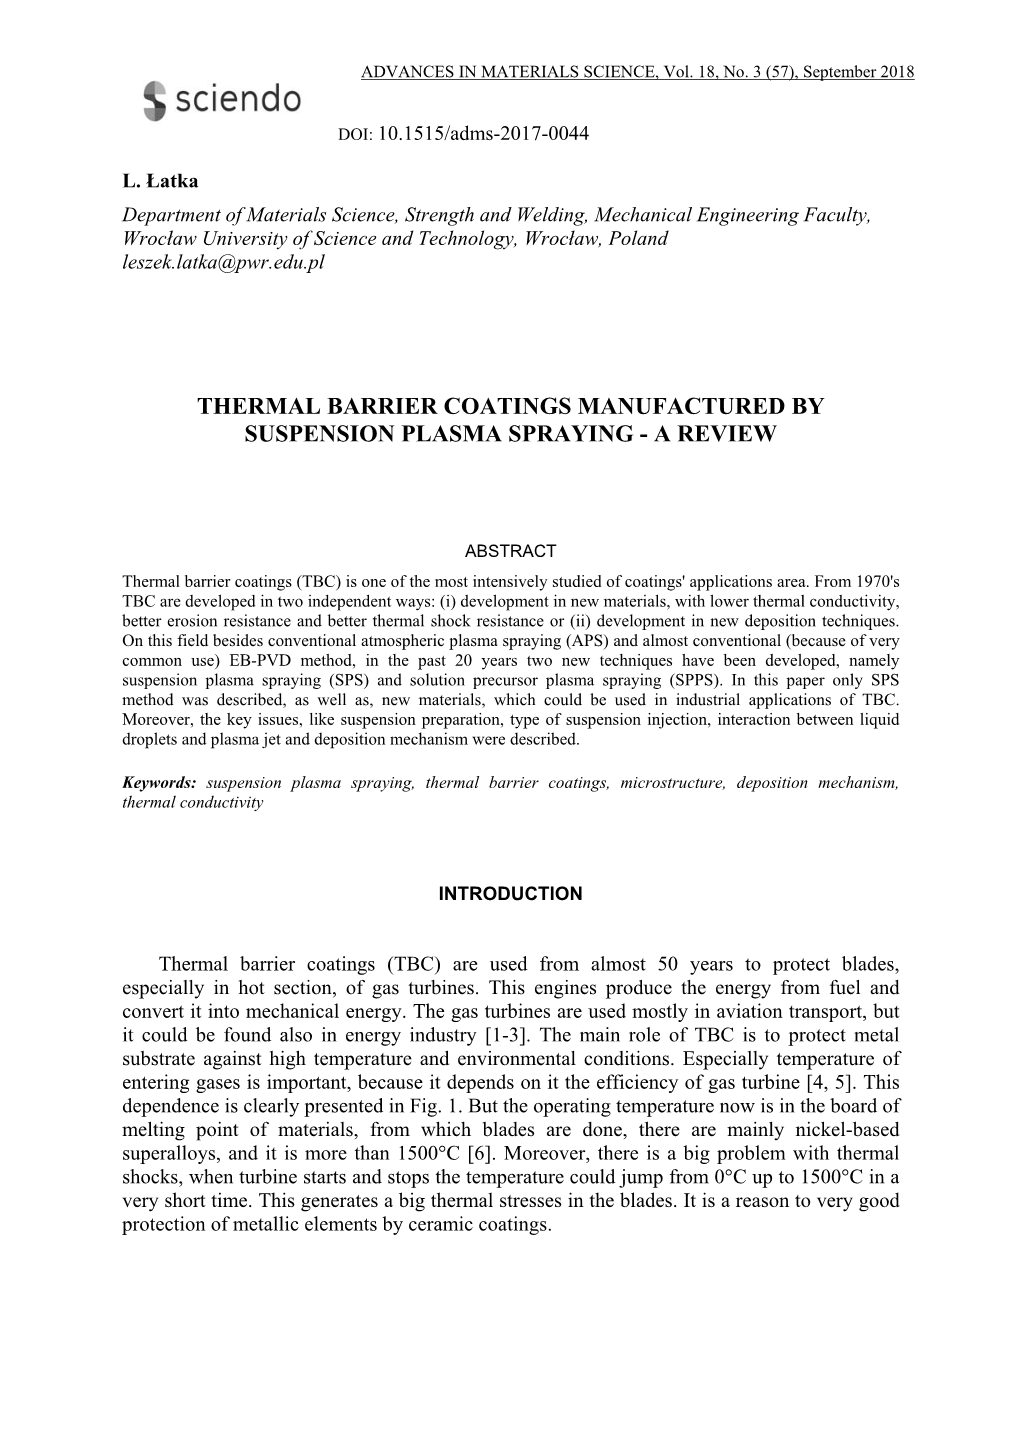 Thermal Barrier Coatings Manufactured by Suspension Plasma Spraying - a Review